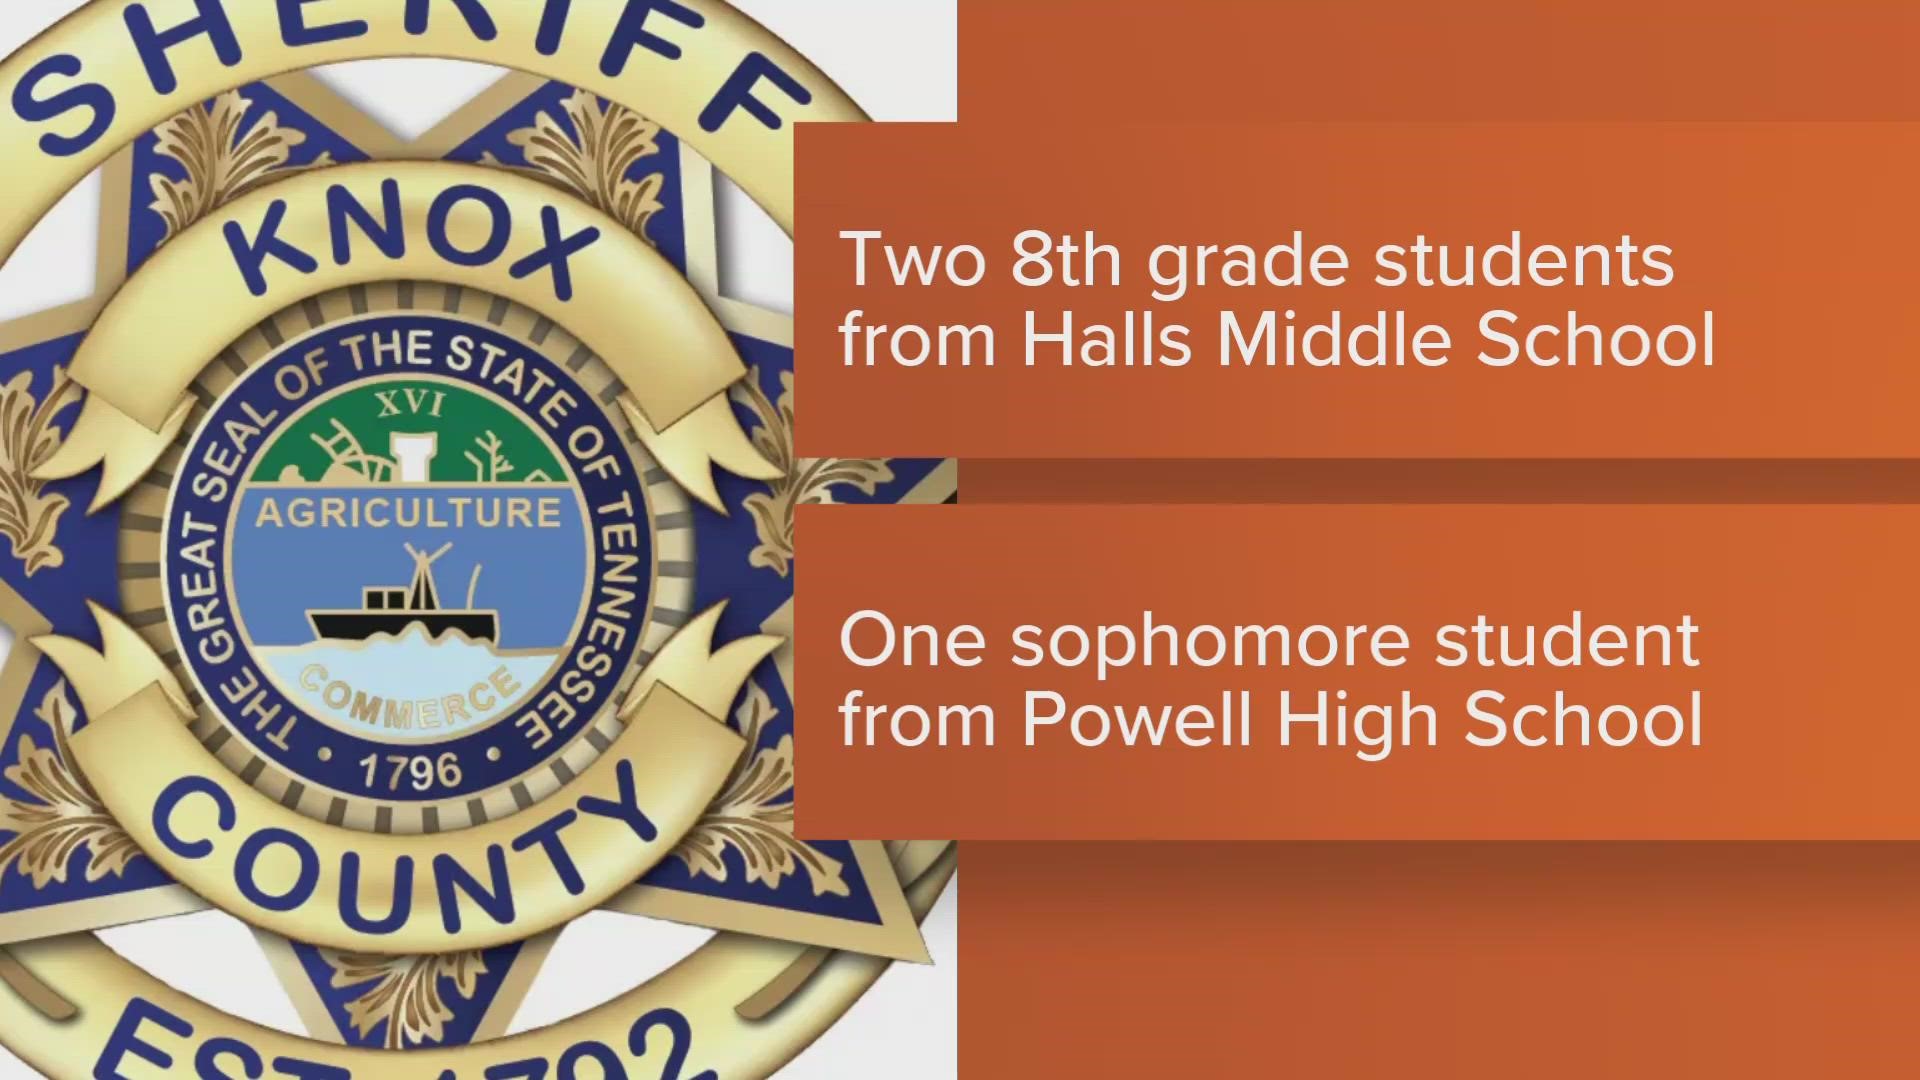 The Knox County Sheriff's Office said there was a threat to Halls Middle School and a separate threat at Powell High School.